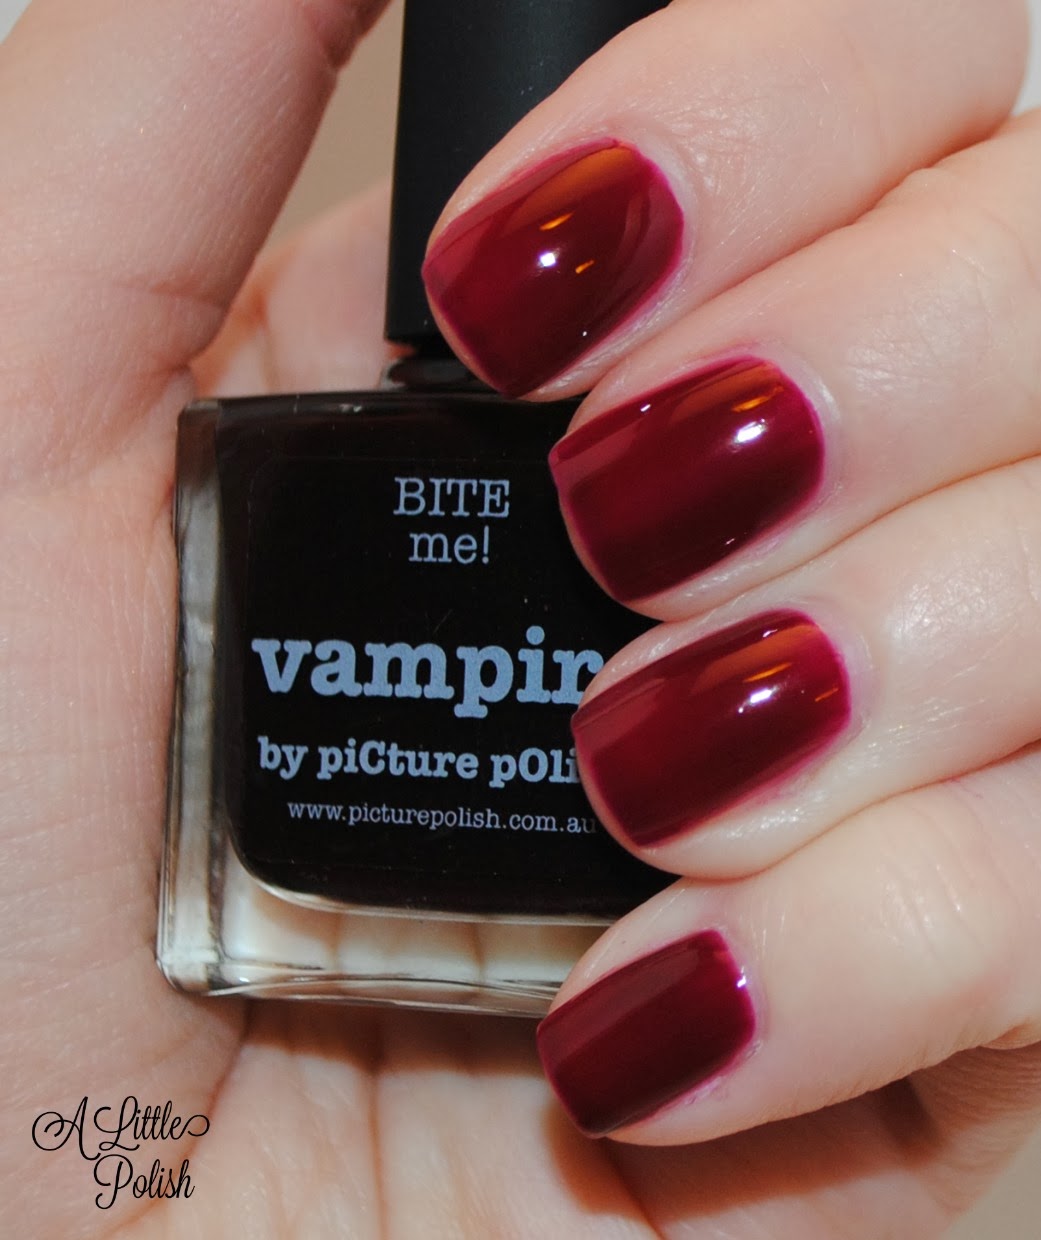 A Little Polish: piCture pOlish - Swatch Spam